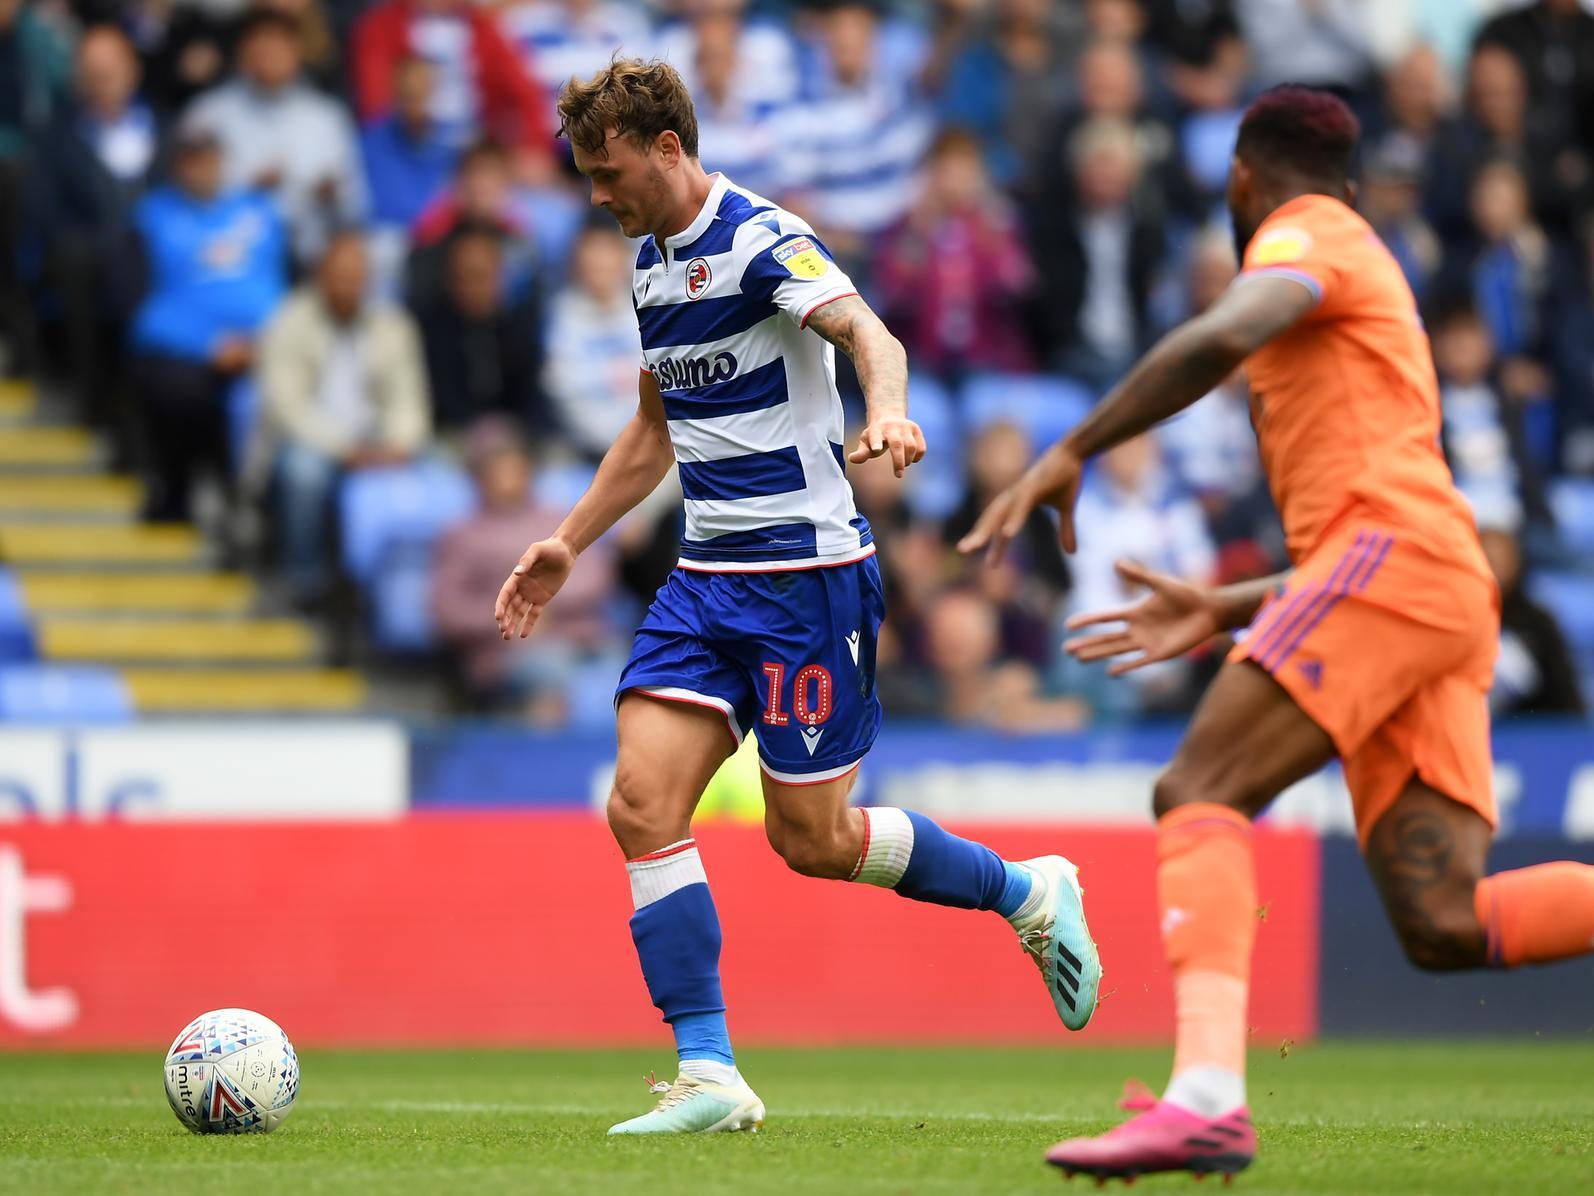 Reading's 24-year-old ex-Chelsea youngster and former England under-21s midfielder makes the team with an average rating of 7.4 - the same as Phillips. Photo by Alex Davidson/Getty Images.